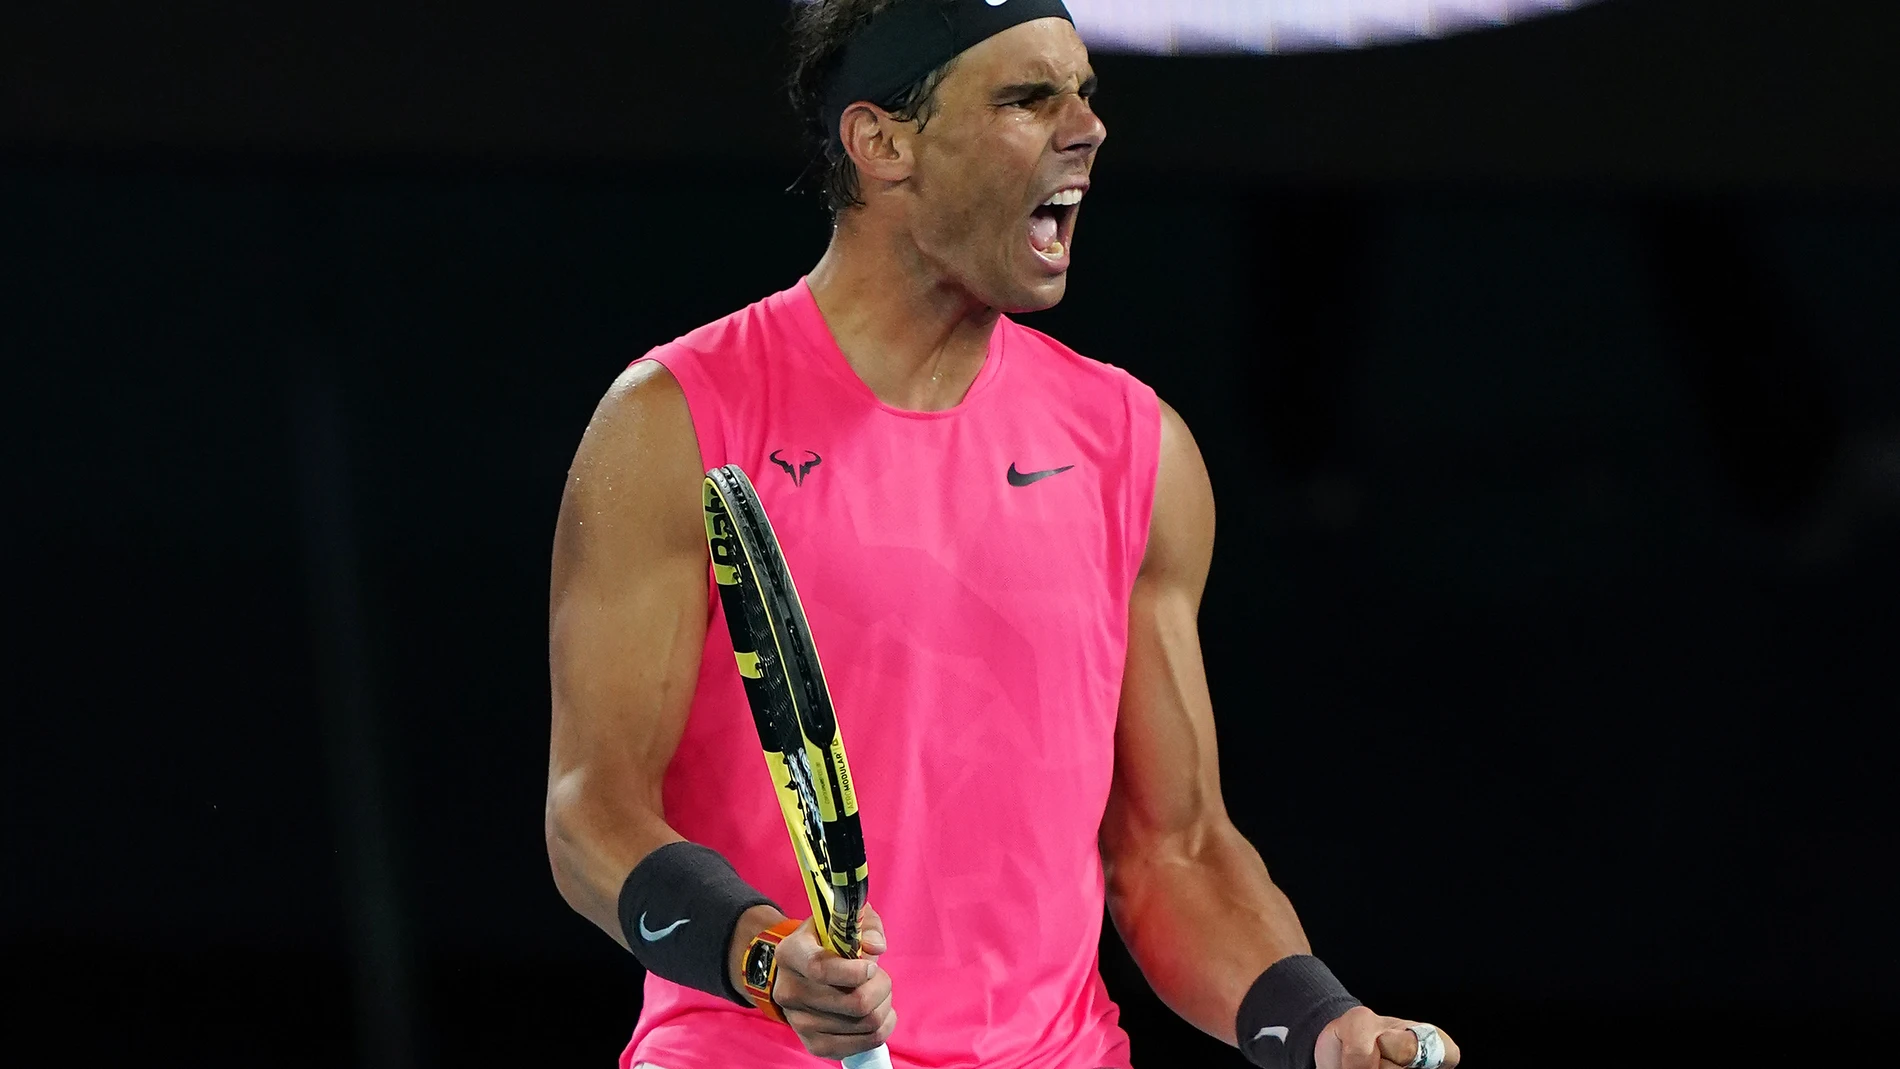 Rafael Nadal of Spain reacts during his fourth round match against Nick Kyrgios of Australia on day eight of the Australian Open tennis tournament at Rod Laver Arena in Melbourne, Monday, January 27, 2020. (AAP Image/Scott Barbour) NO ARCHIVING, EDITORIA